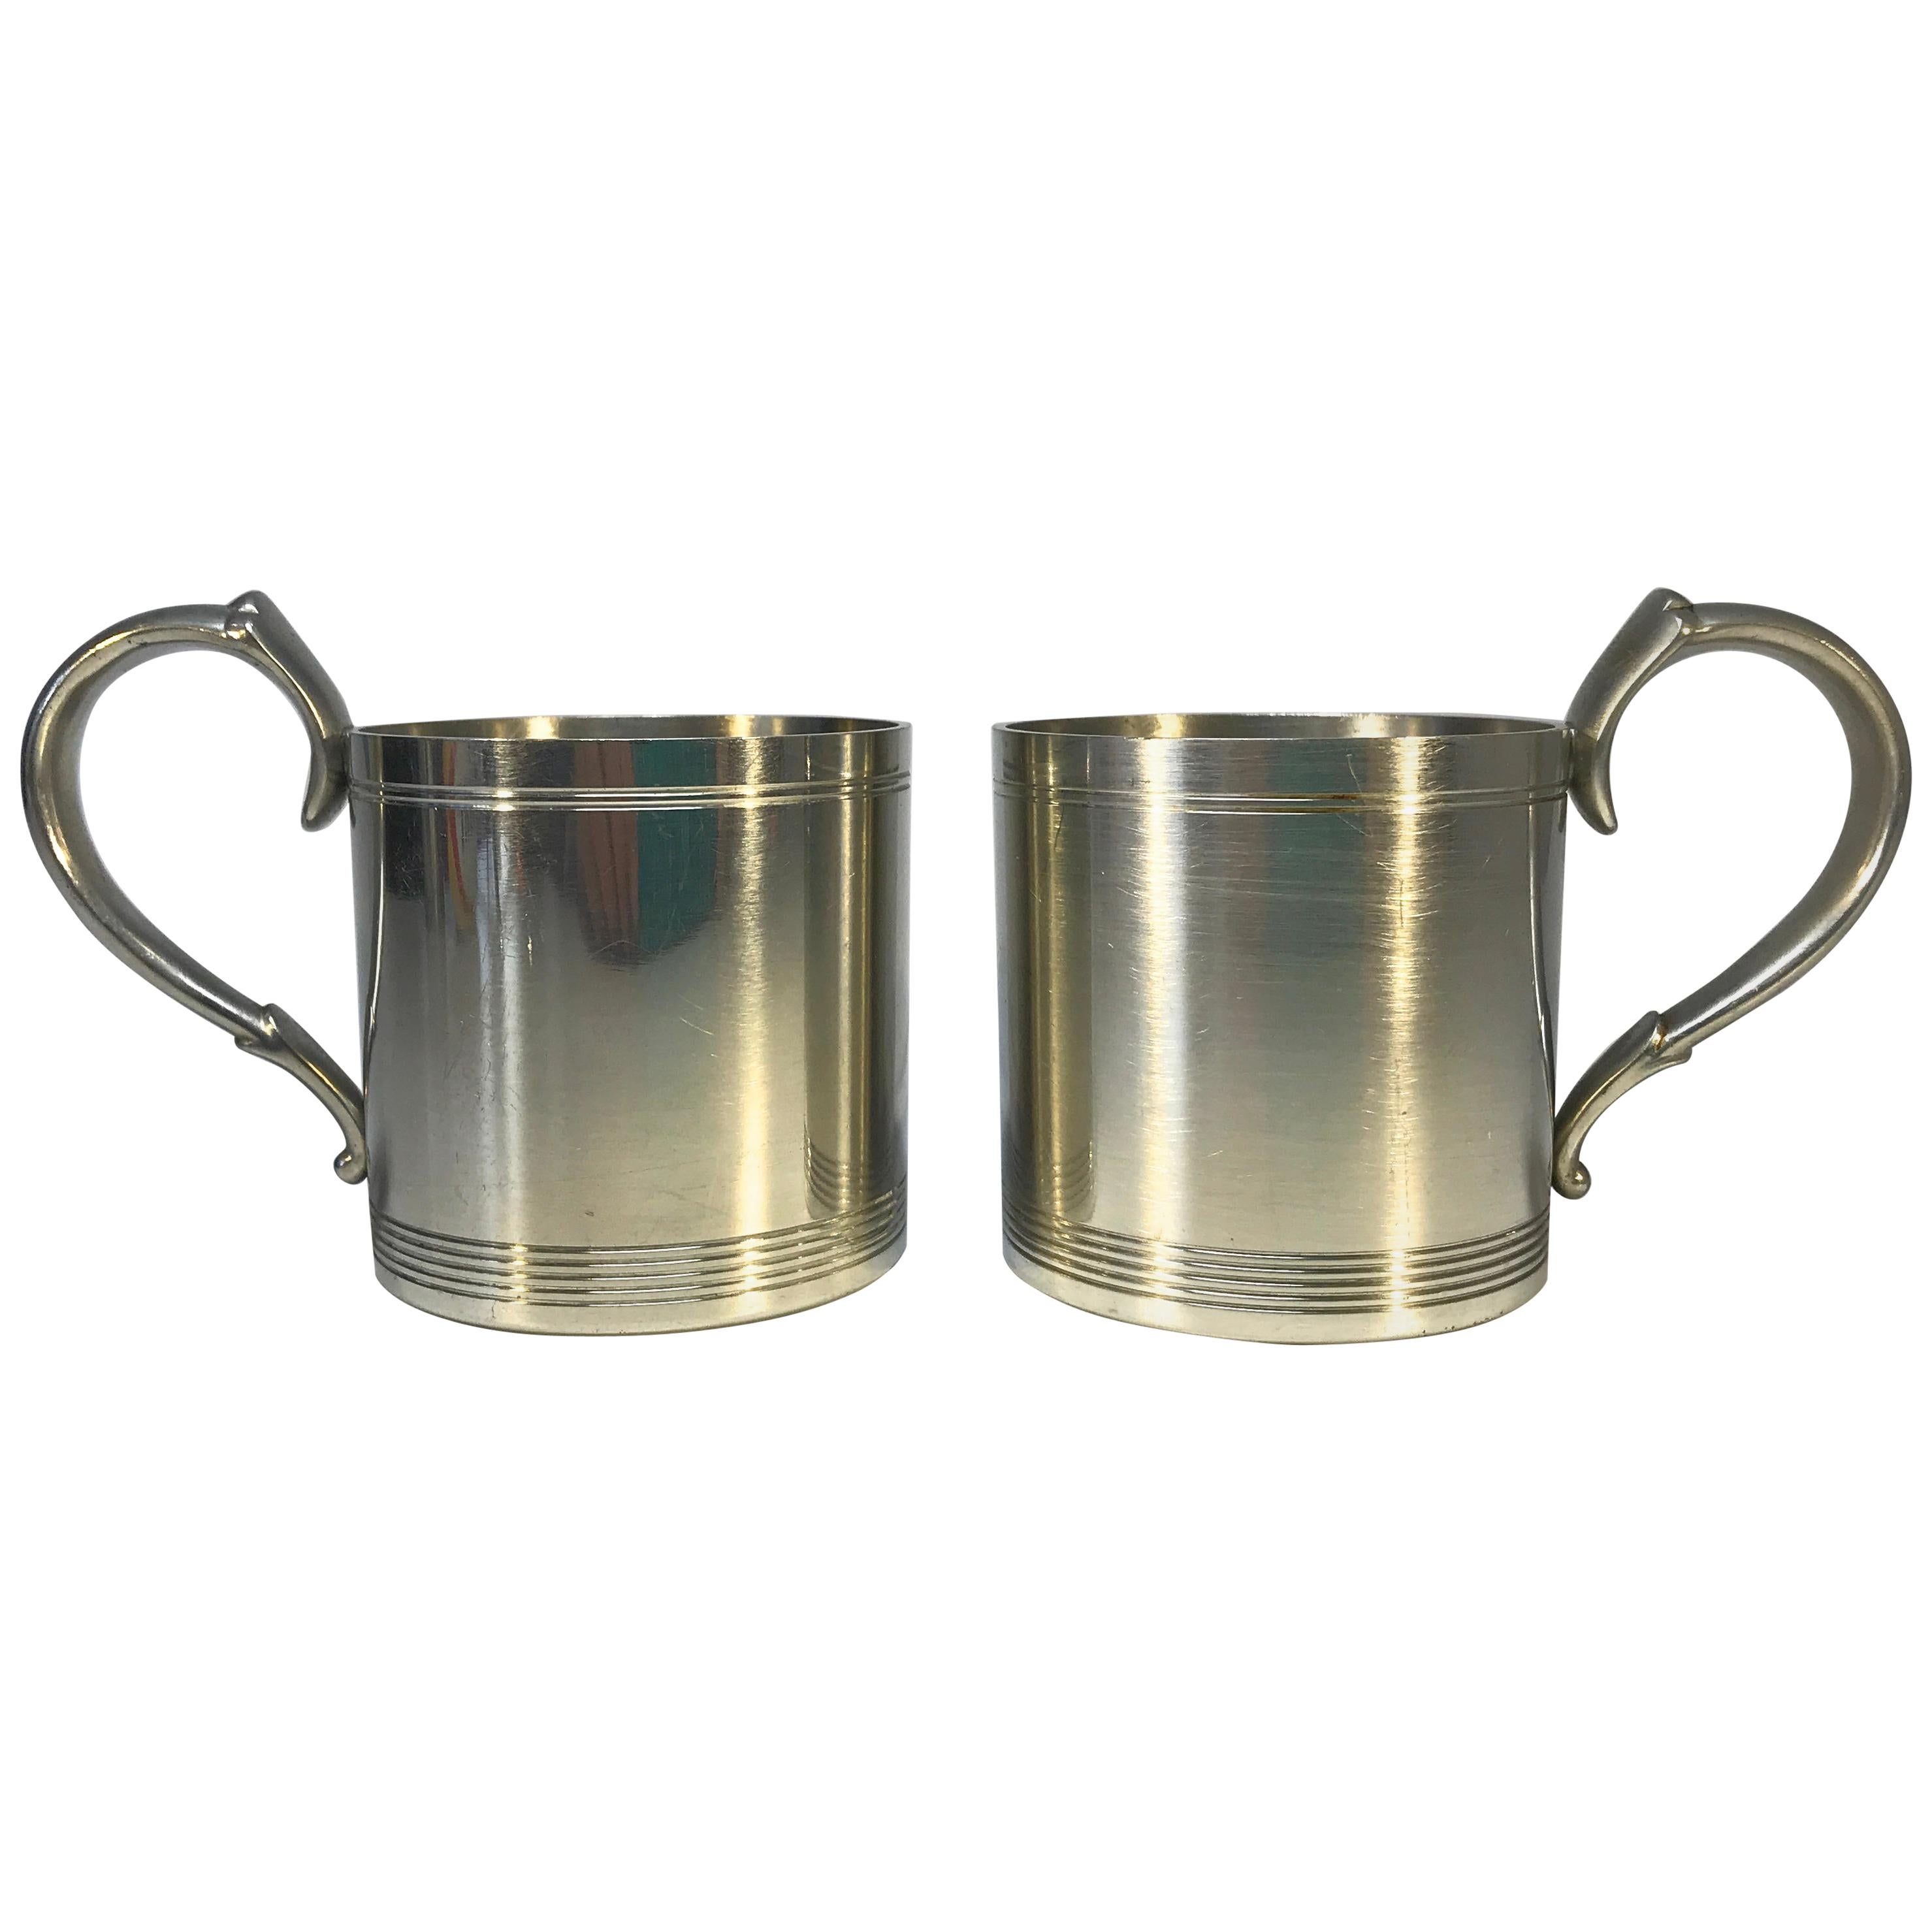 https://a.1stdibscdn.com/just-andersen-denmark-pair-vintage-polished-pewter-1940s-hot-toddy-cups-1289-for-sale/1121189/f_170639511575097755410/17063951_master.jpg